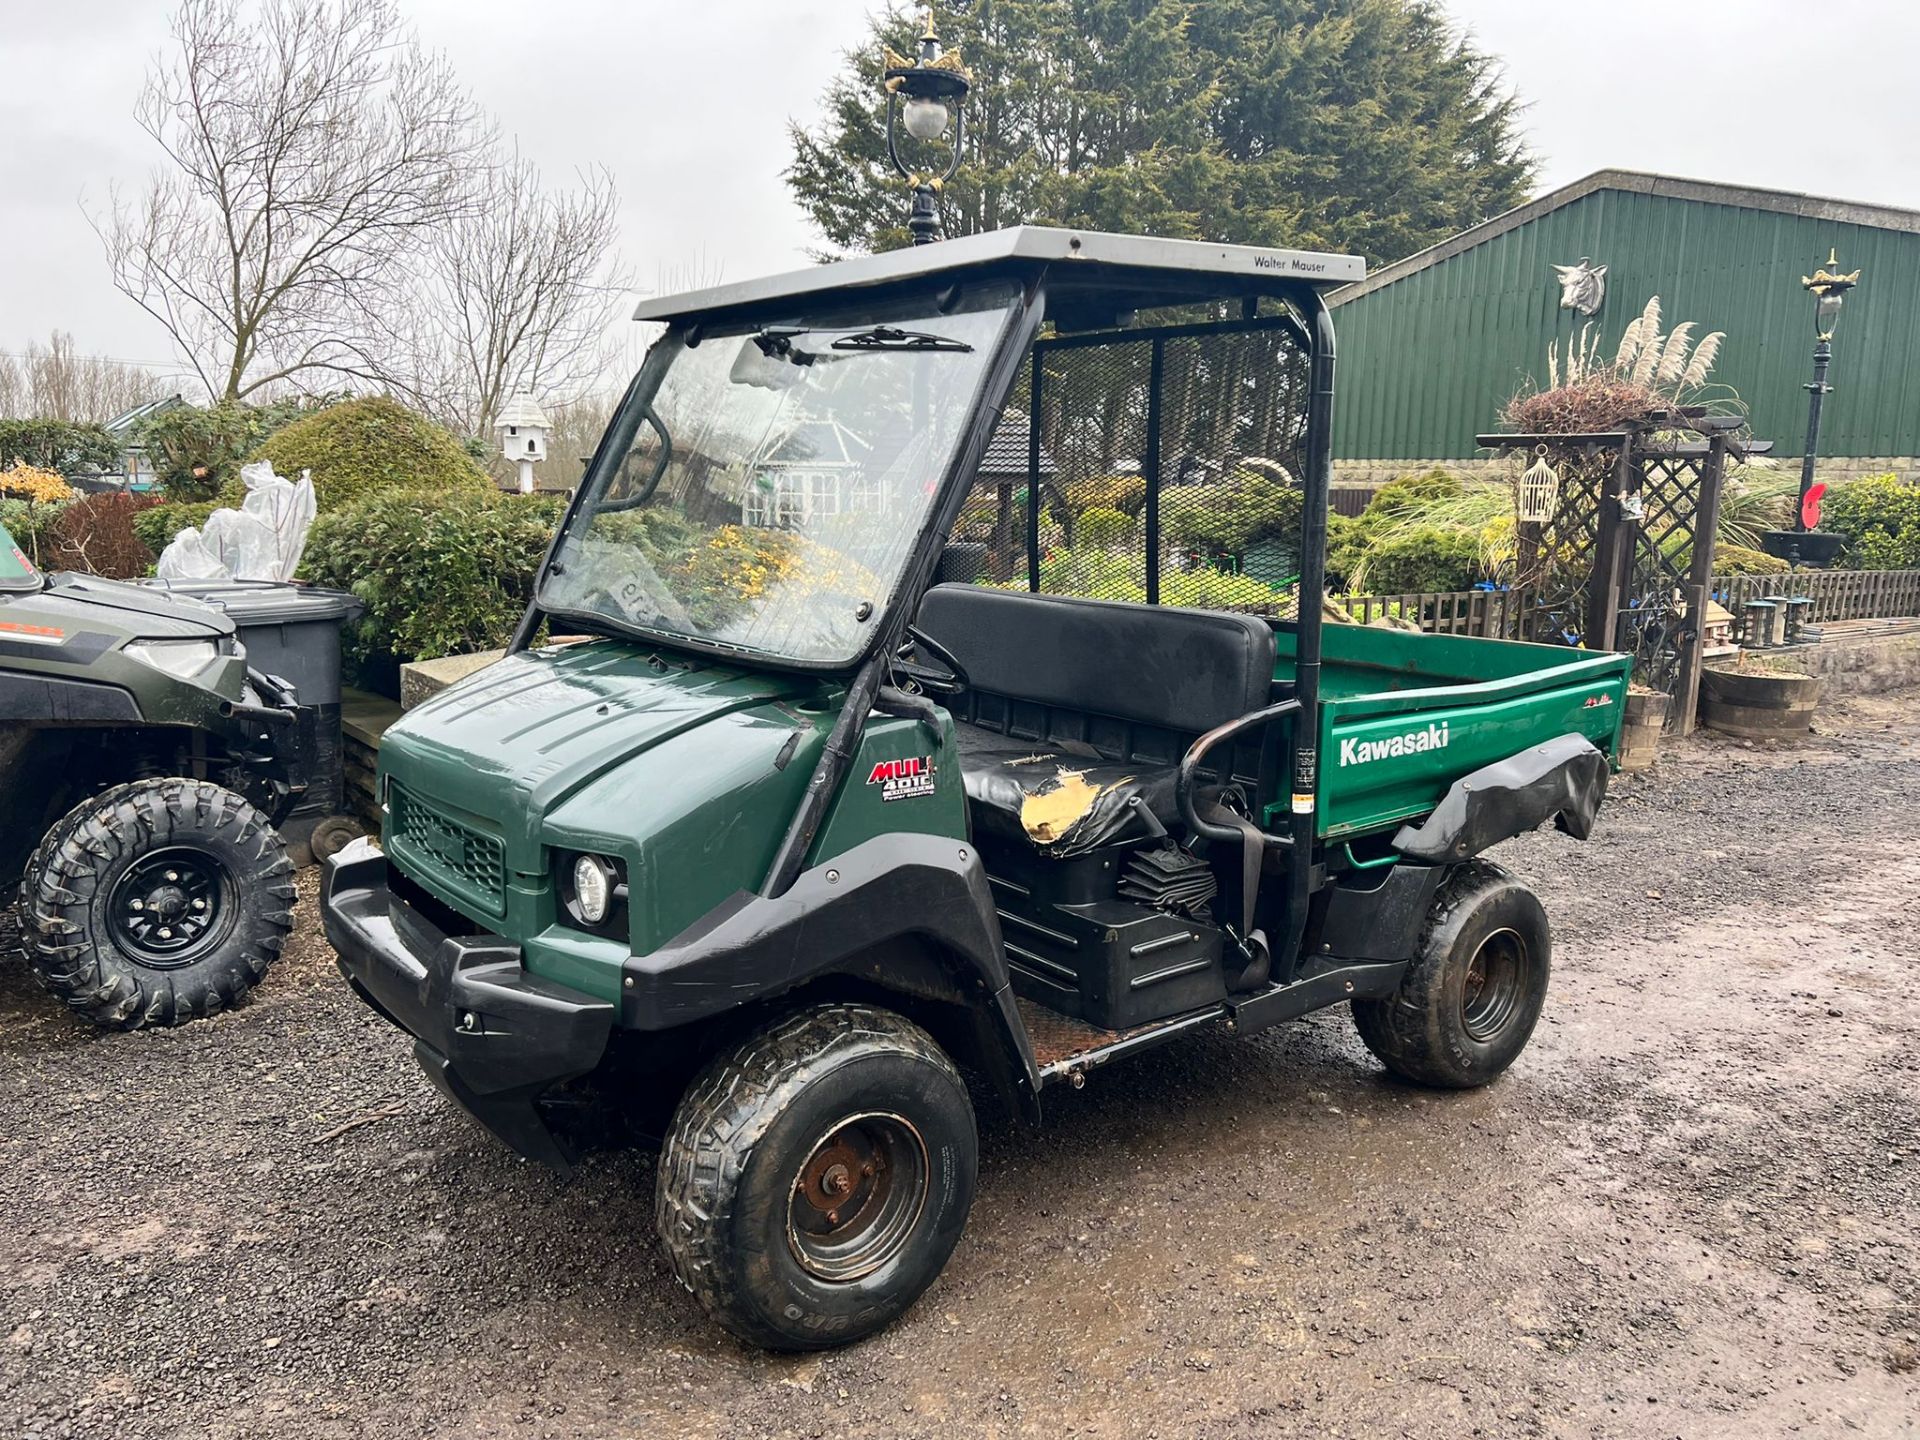 2009 Kawasaki Mule 4010 4WD Buggy/UTV, Runs And Drives, Showing A Low 2425 Hours! *PLUS VAT* - Image 2 of 10